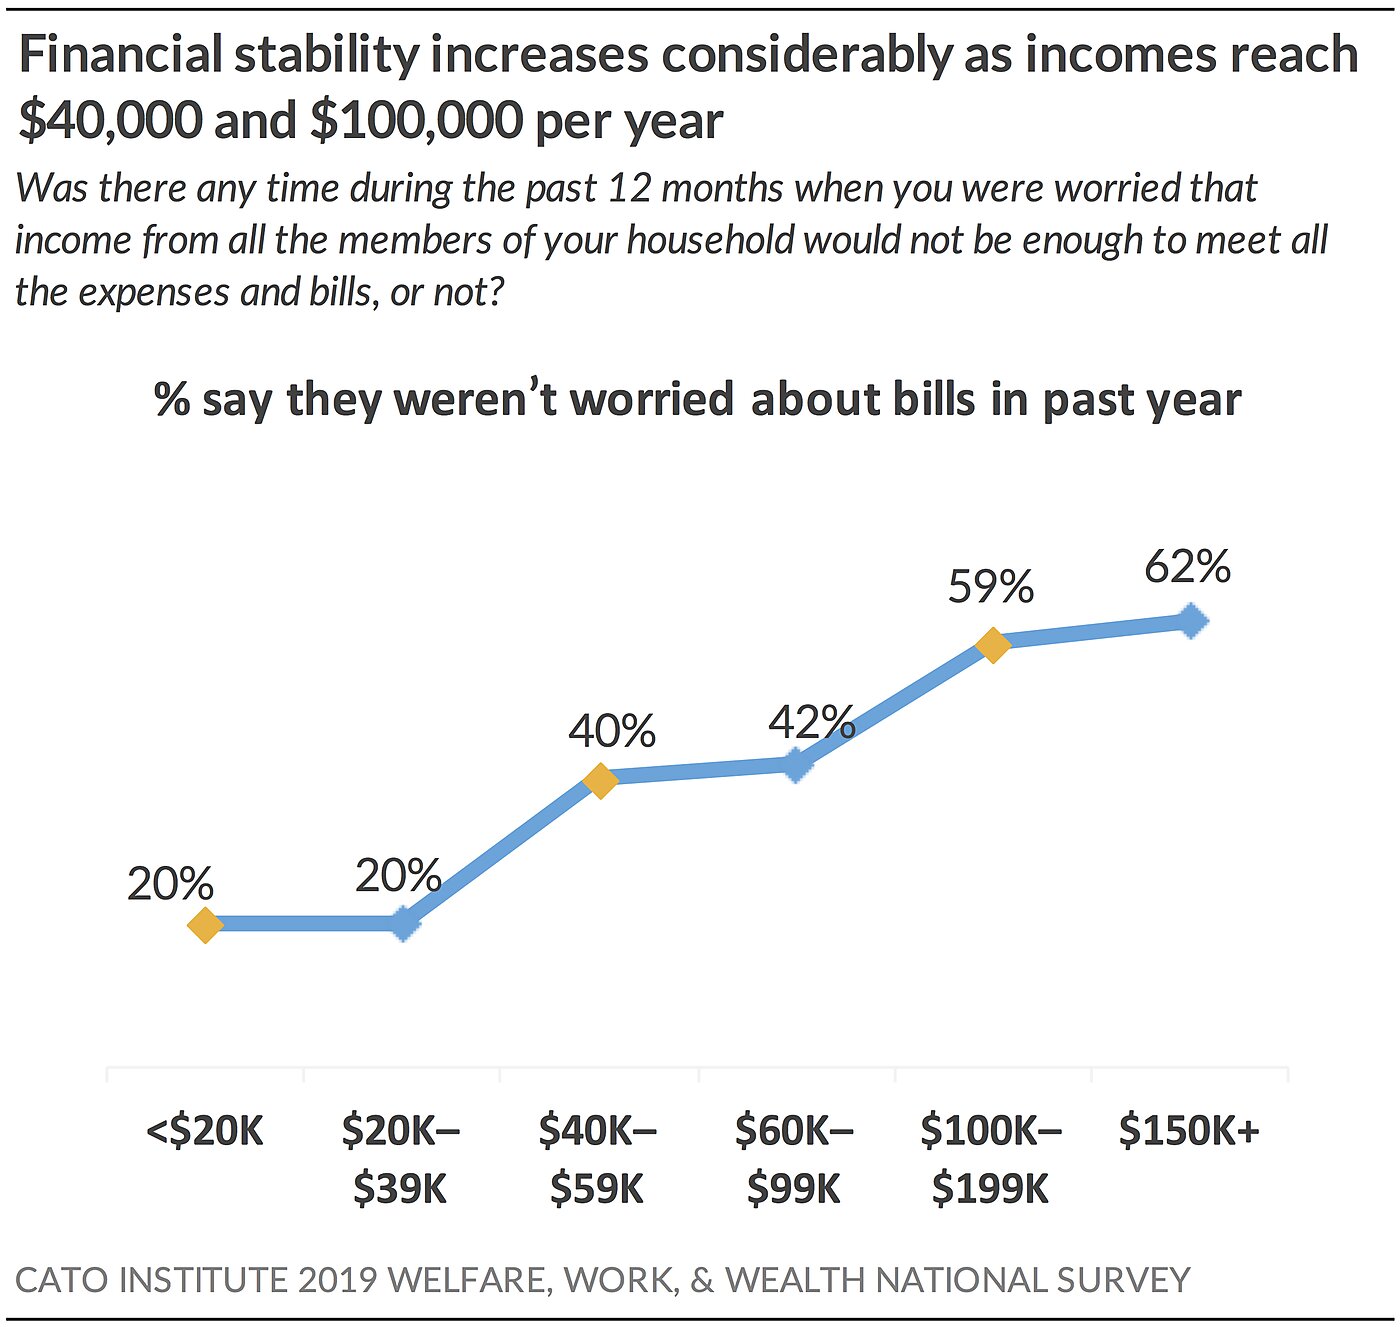 Financial stability increases